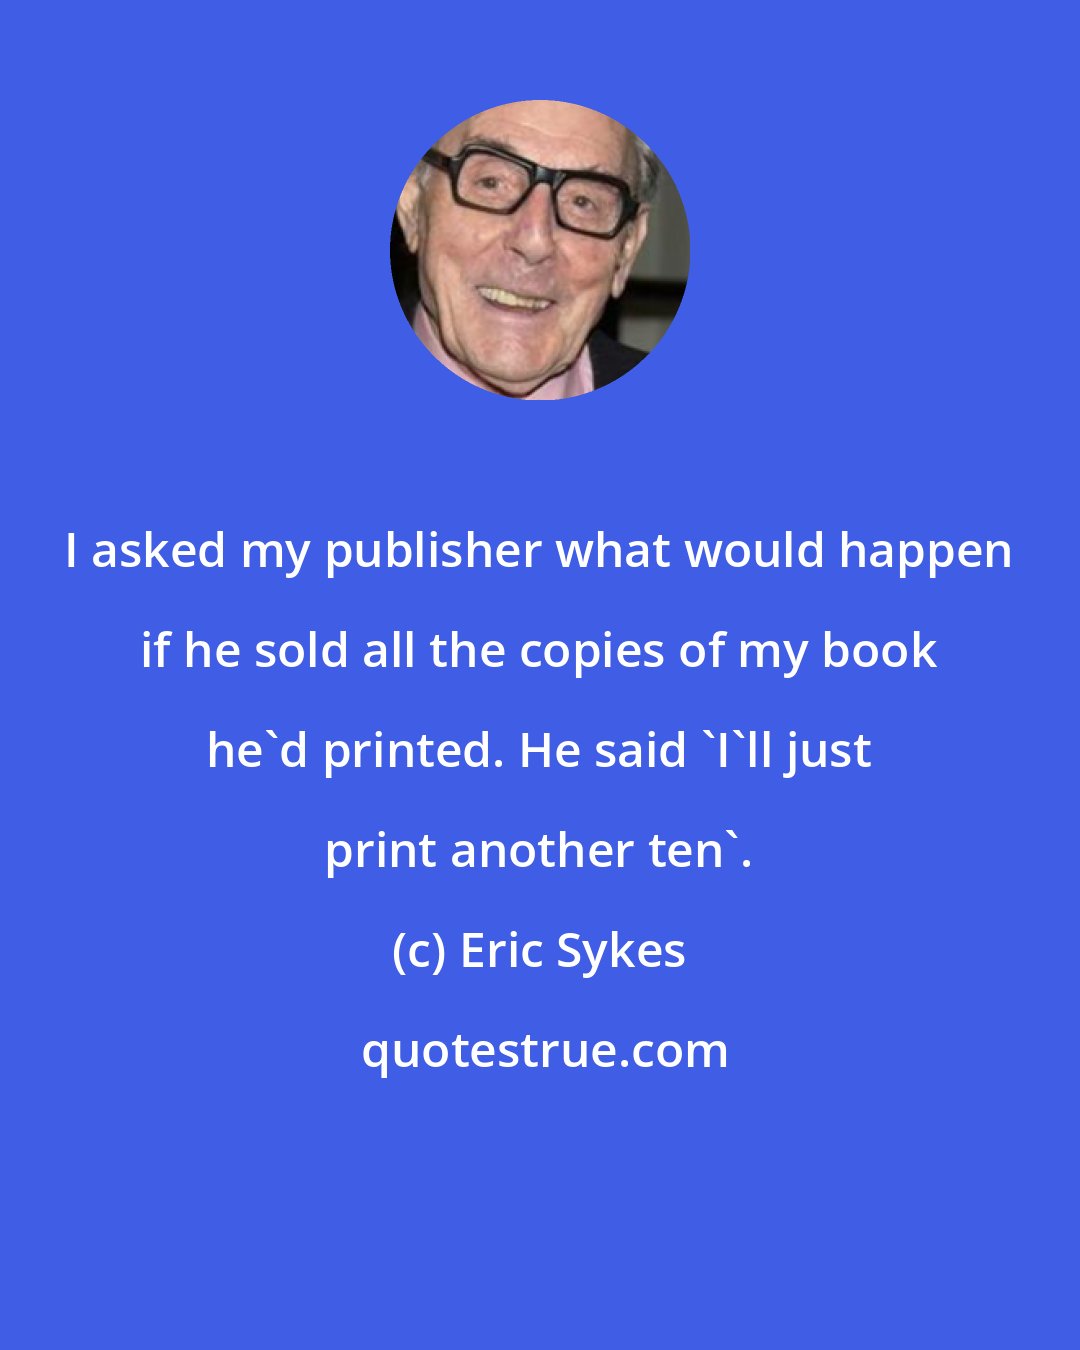 Eric Sykes: I asked my publisher what would happen if he sold all the copies of my book he'd printed. He said 'I'll just print another ten'.